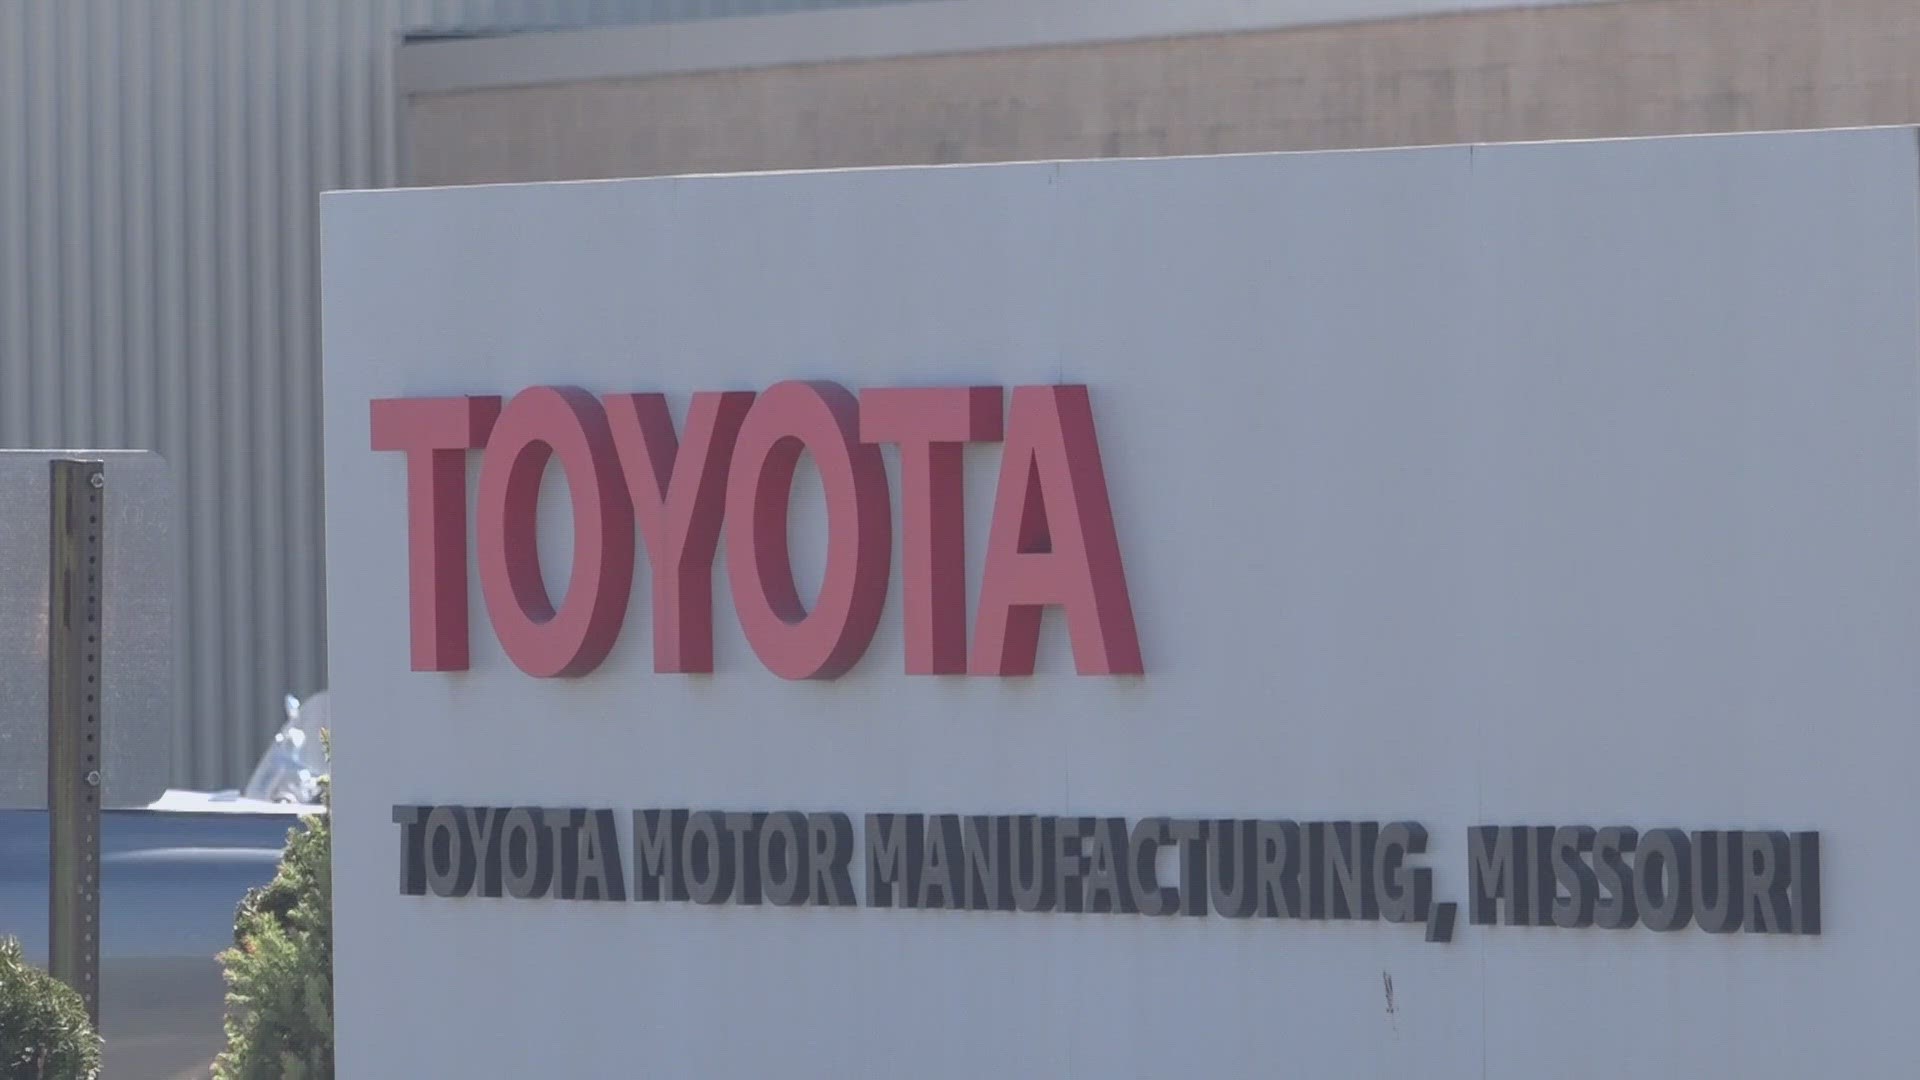 More than a third of the workers at the Toyota plant said they are earning low wages and working in unsafe conditions.